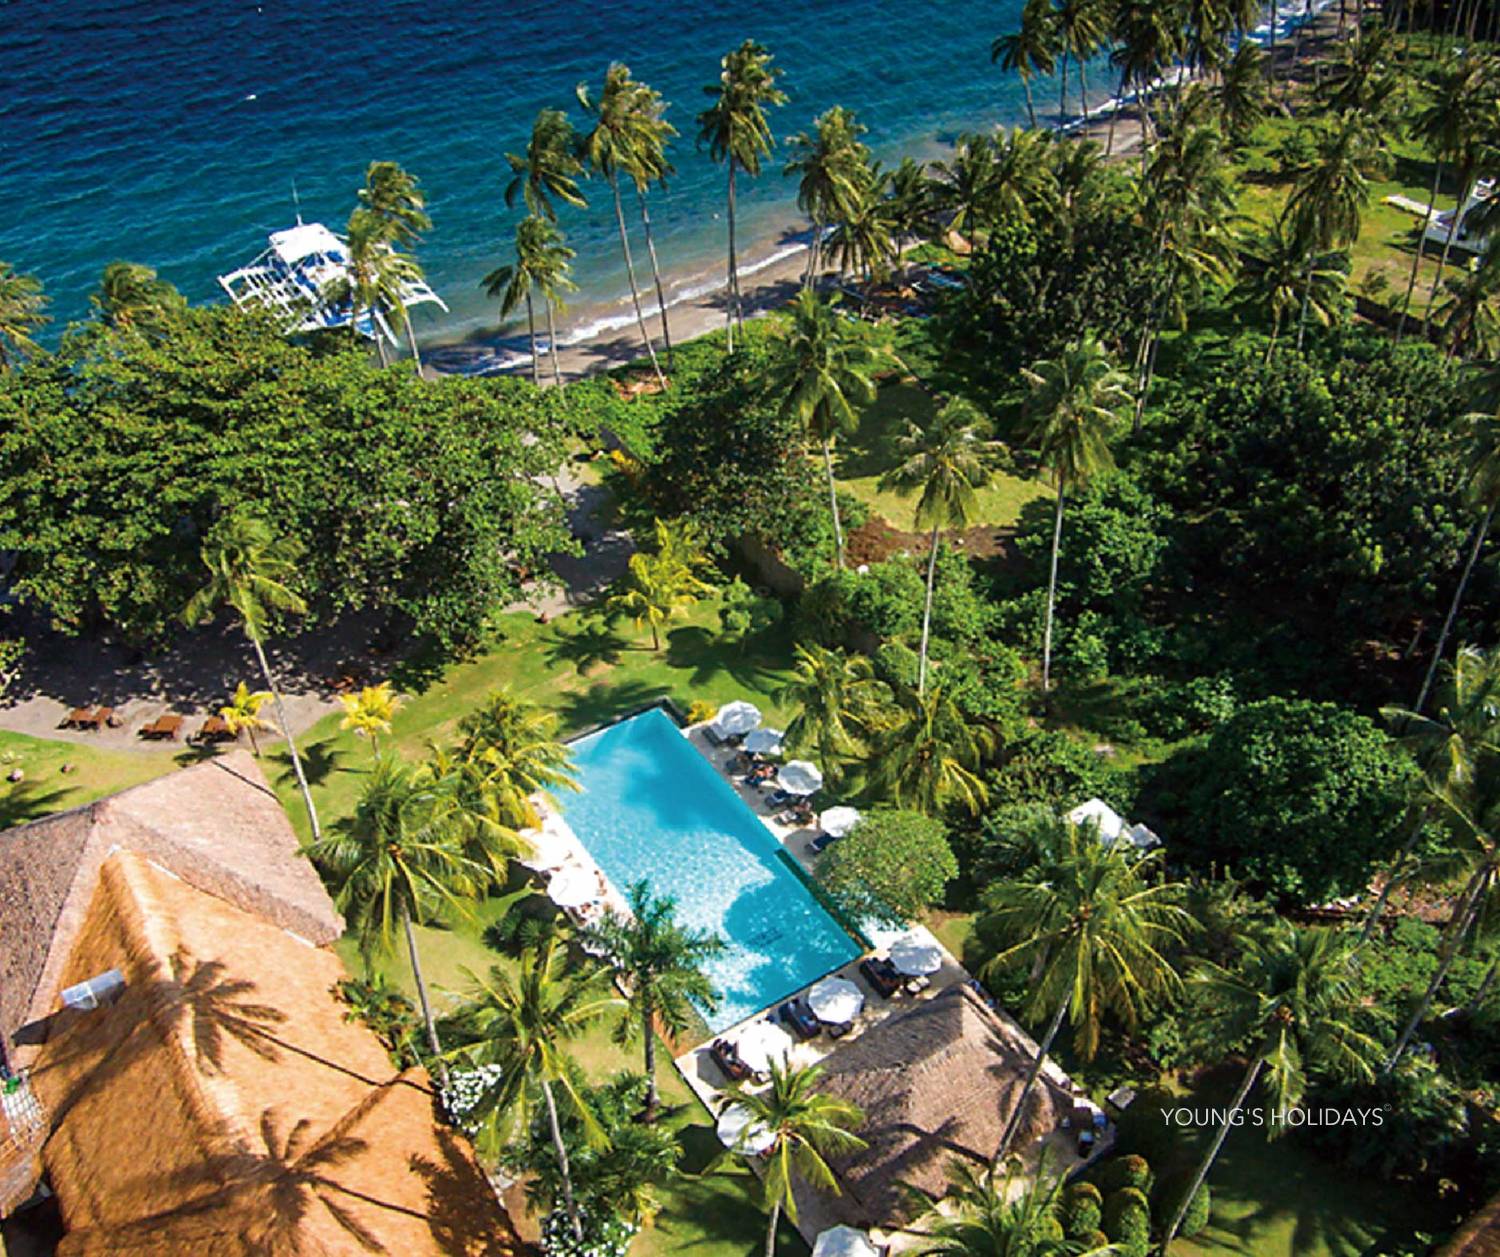 【Philippines】Dumaguete Atmosphere Resorts & Spa 5 days 4 nights diving package